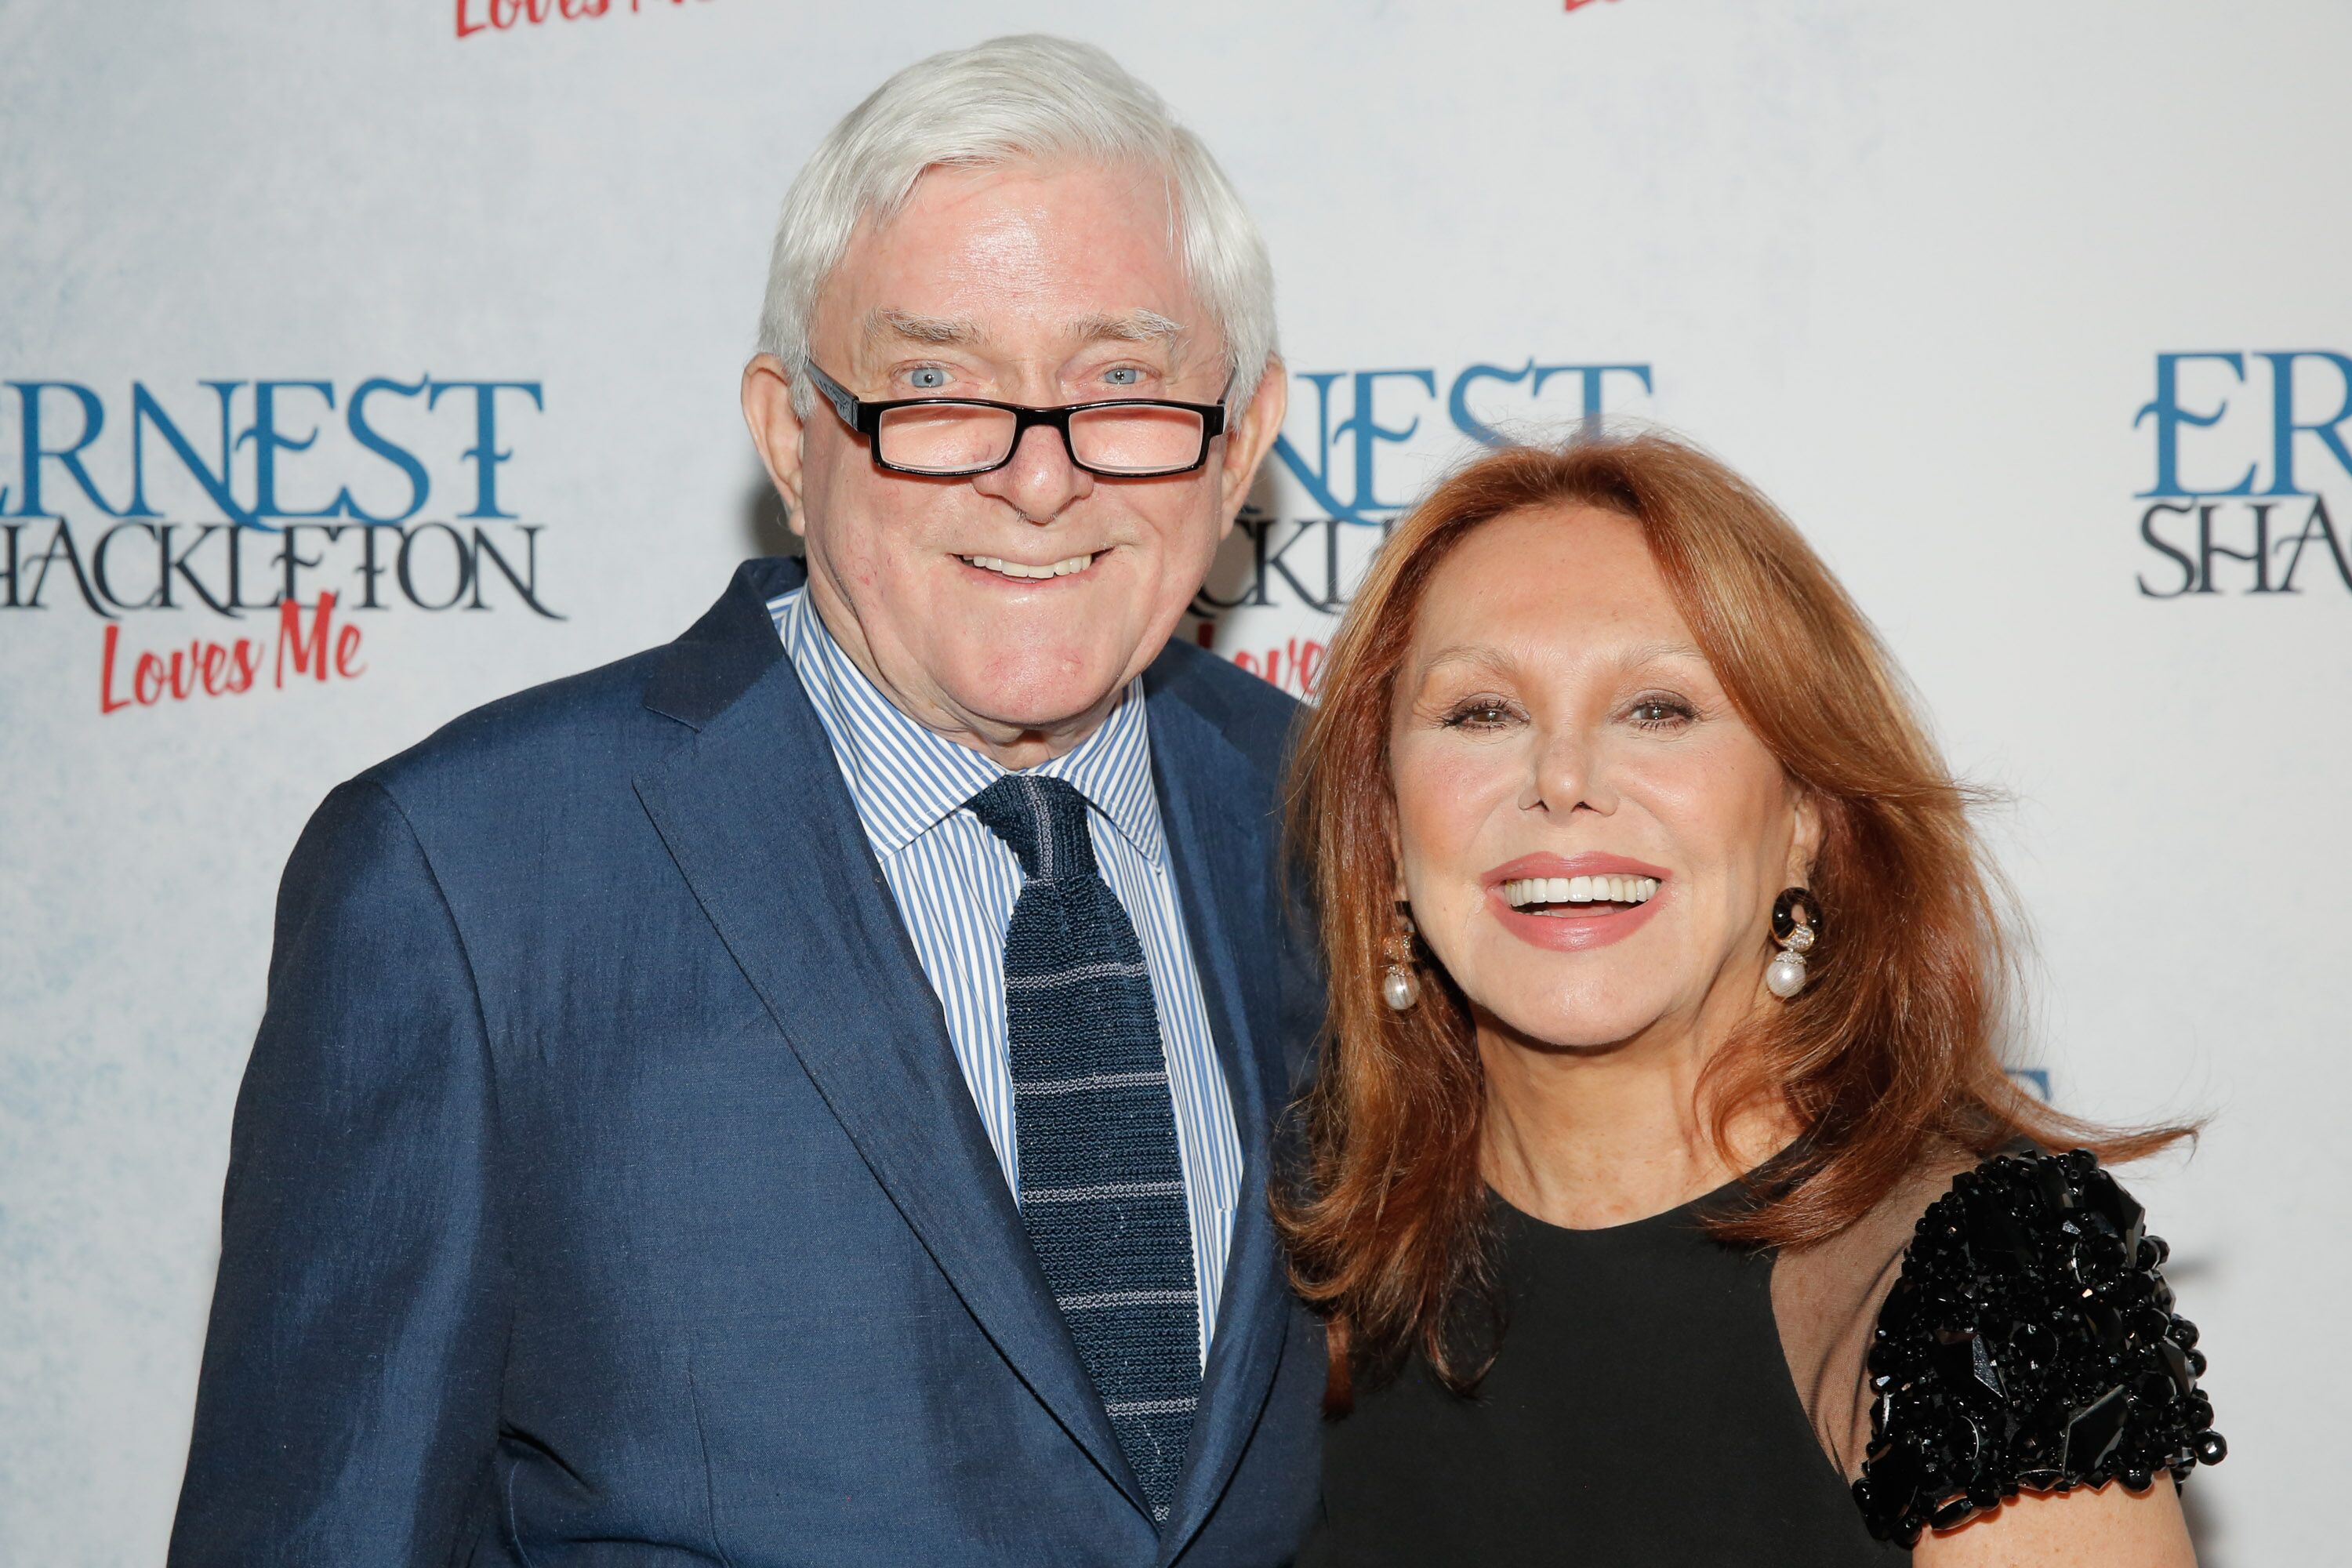 Phil Donahue and Marlo Thomas attend the Off-Broadway opening of "Ernest Shackleton Loves Me" at the Tony Kiser Theatre on May 7, 2017 in New York City. | Source: Getty Images